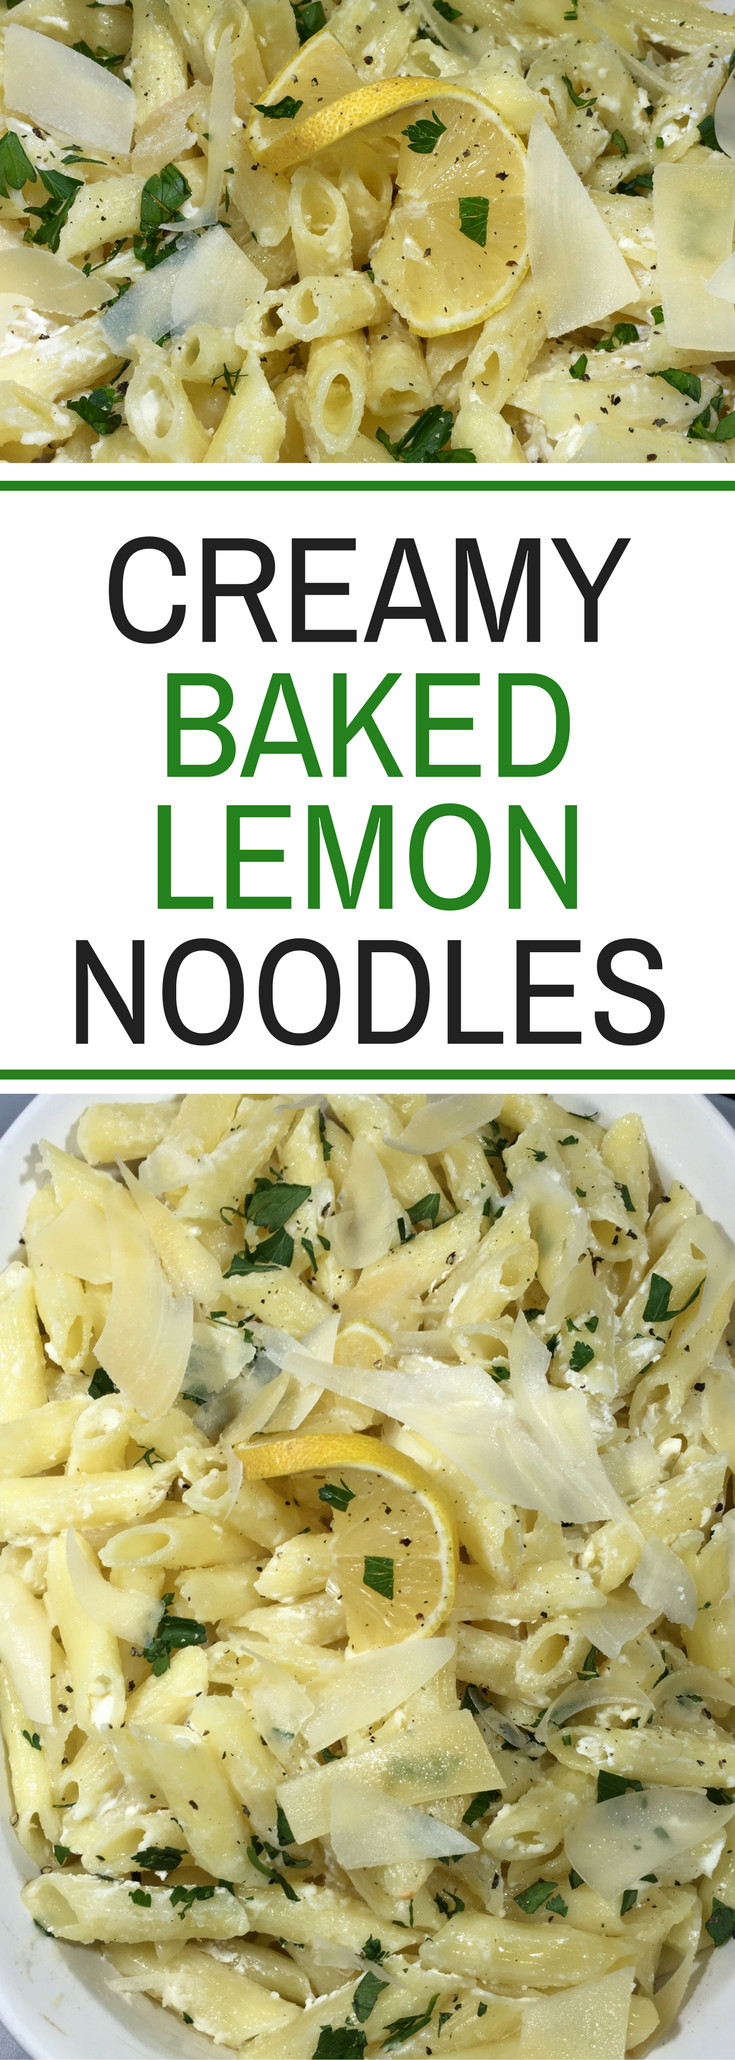 Pasta Side Dishes For Fish
 Creamy Baked Lemon Noodles